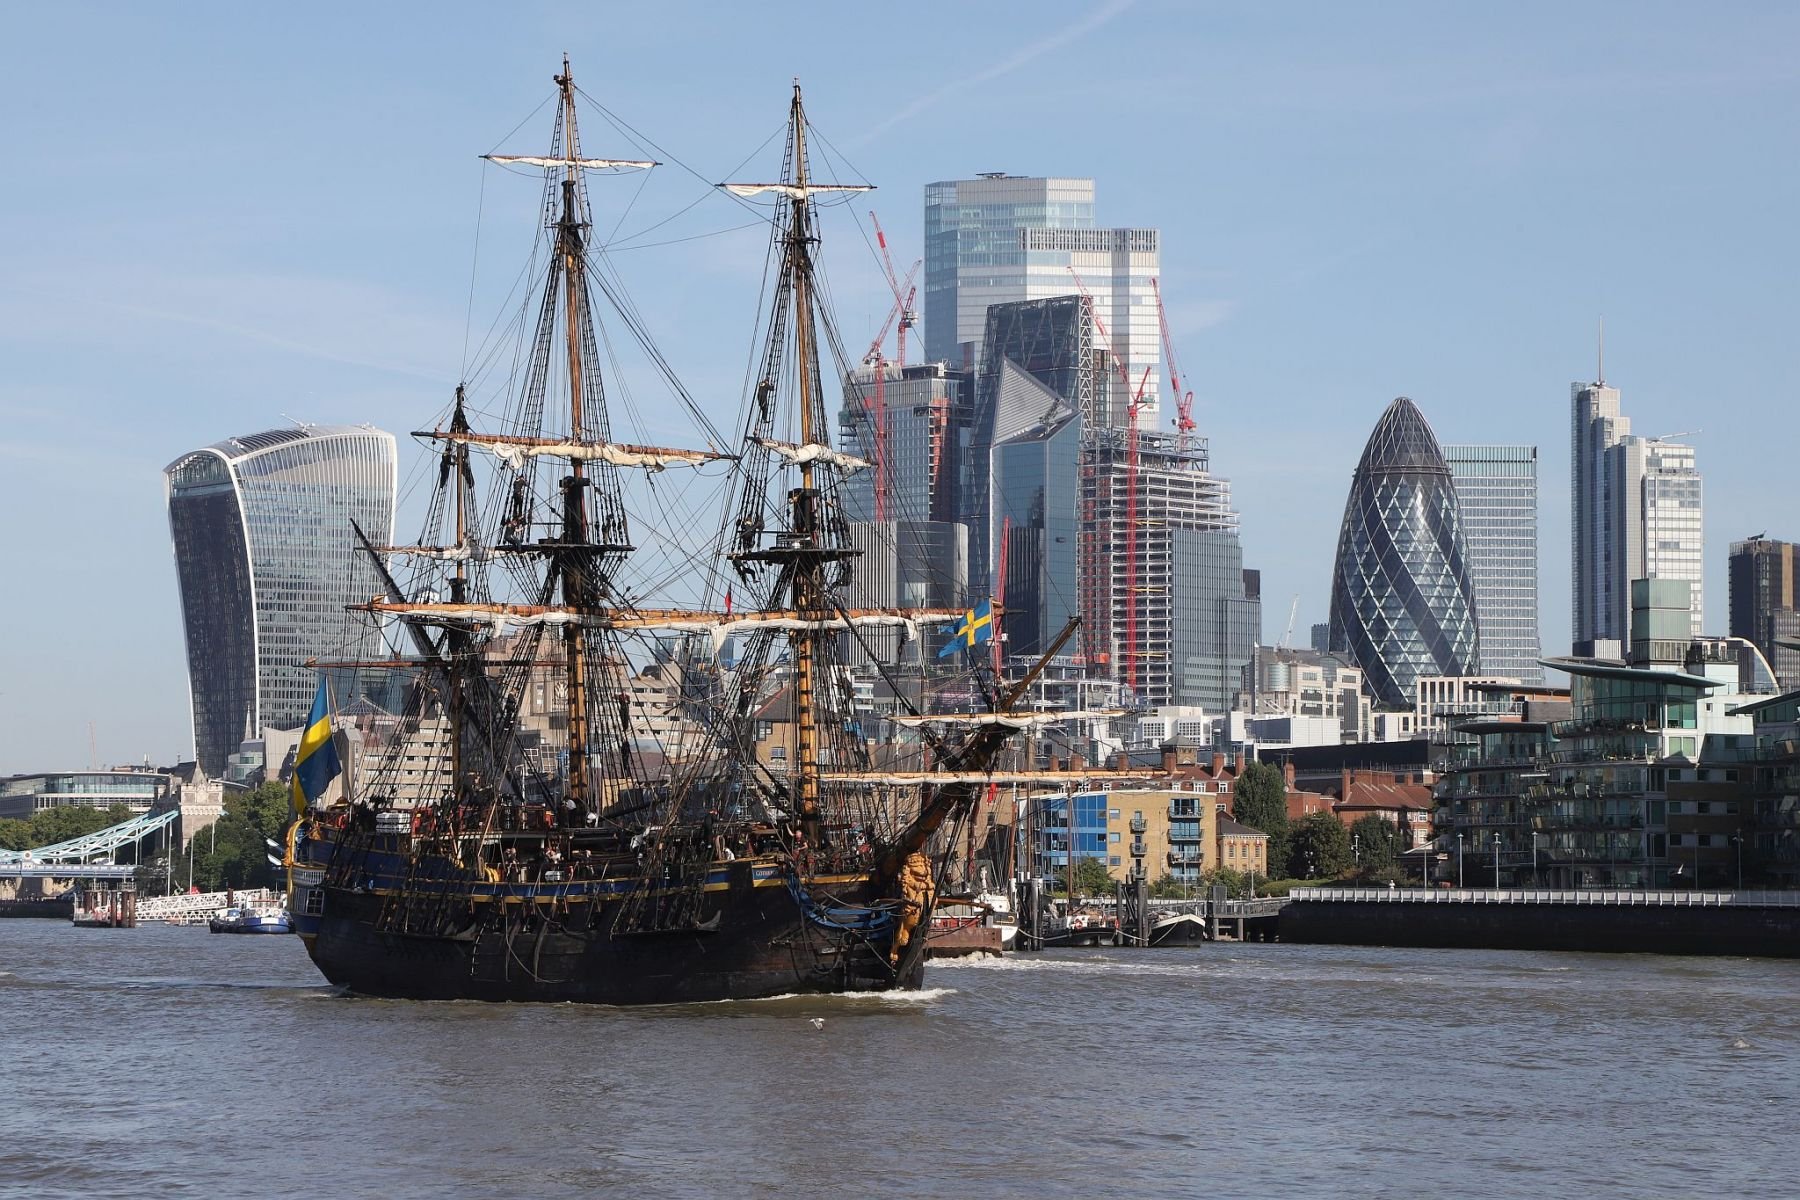 Sailing ship Götheborg of Sweden sailing  downstream through London on the River Thames from Tower Bridge, passing the City of London